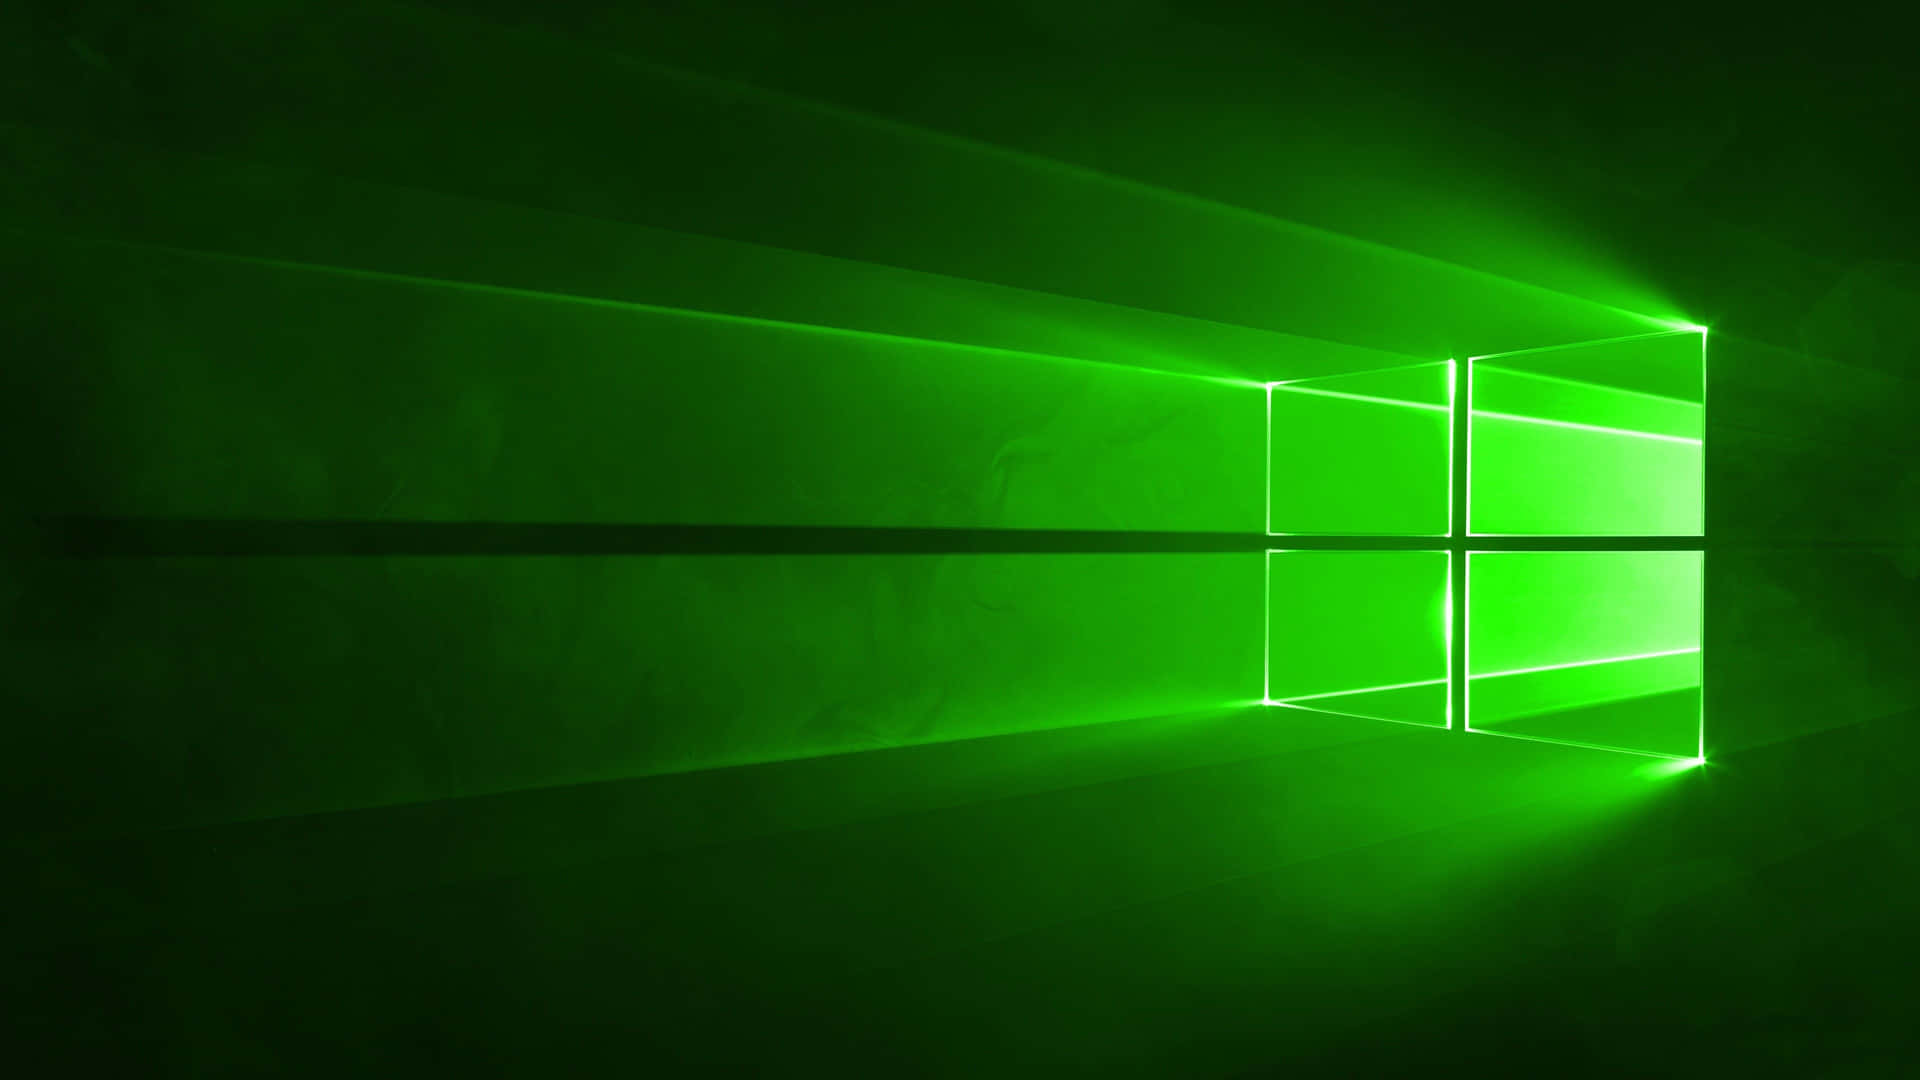 Take your computer desktop to the next level with this vibrant green background! Wallpaper